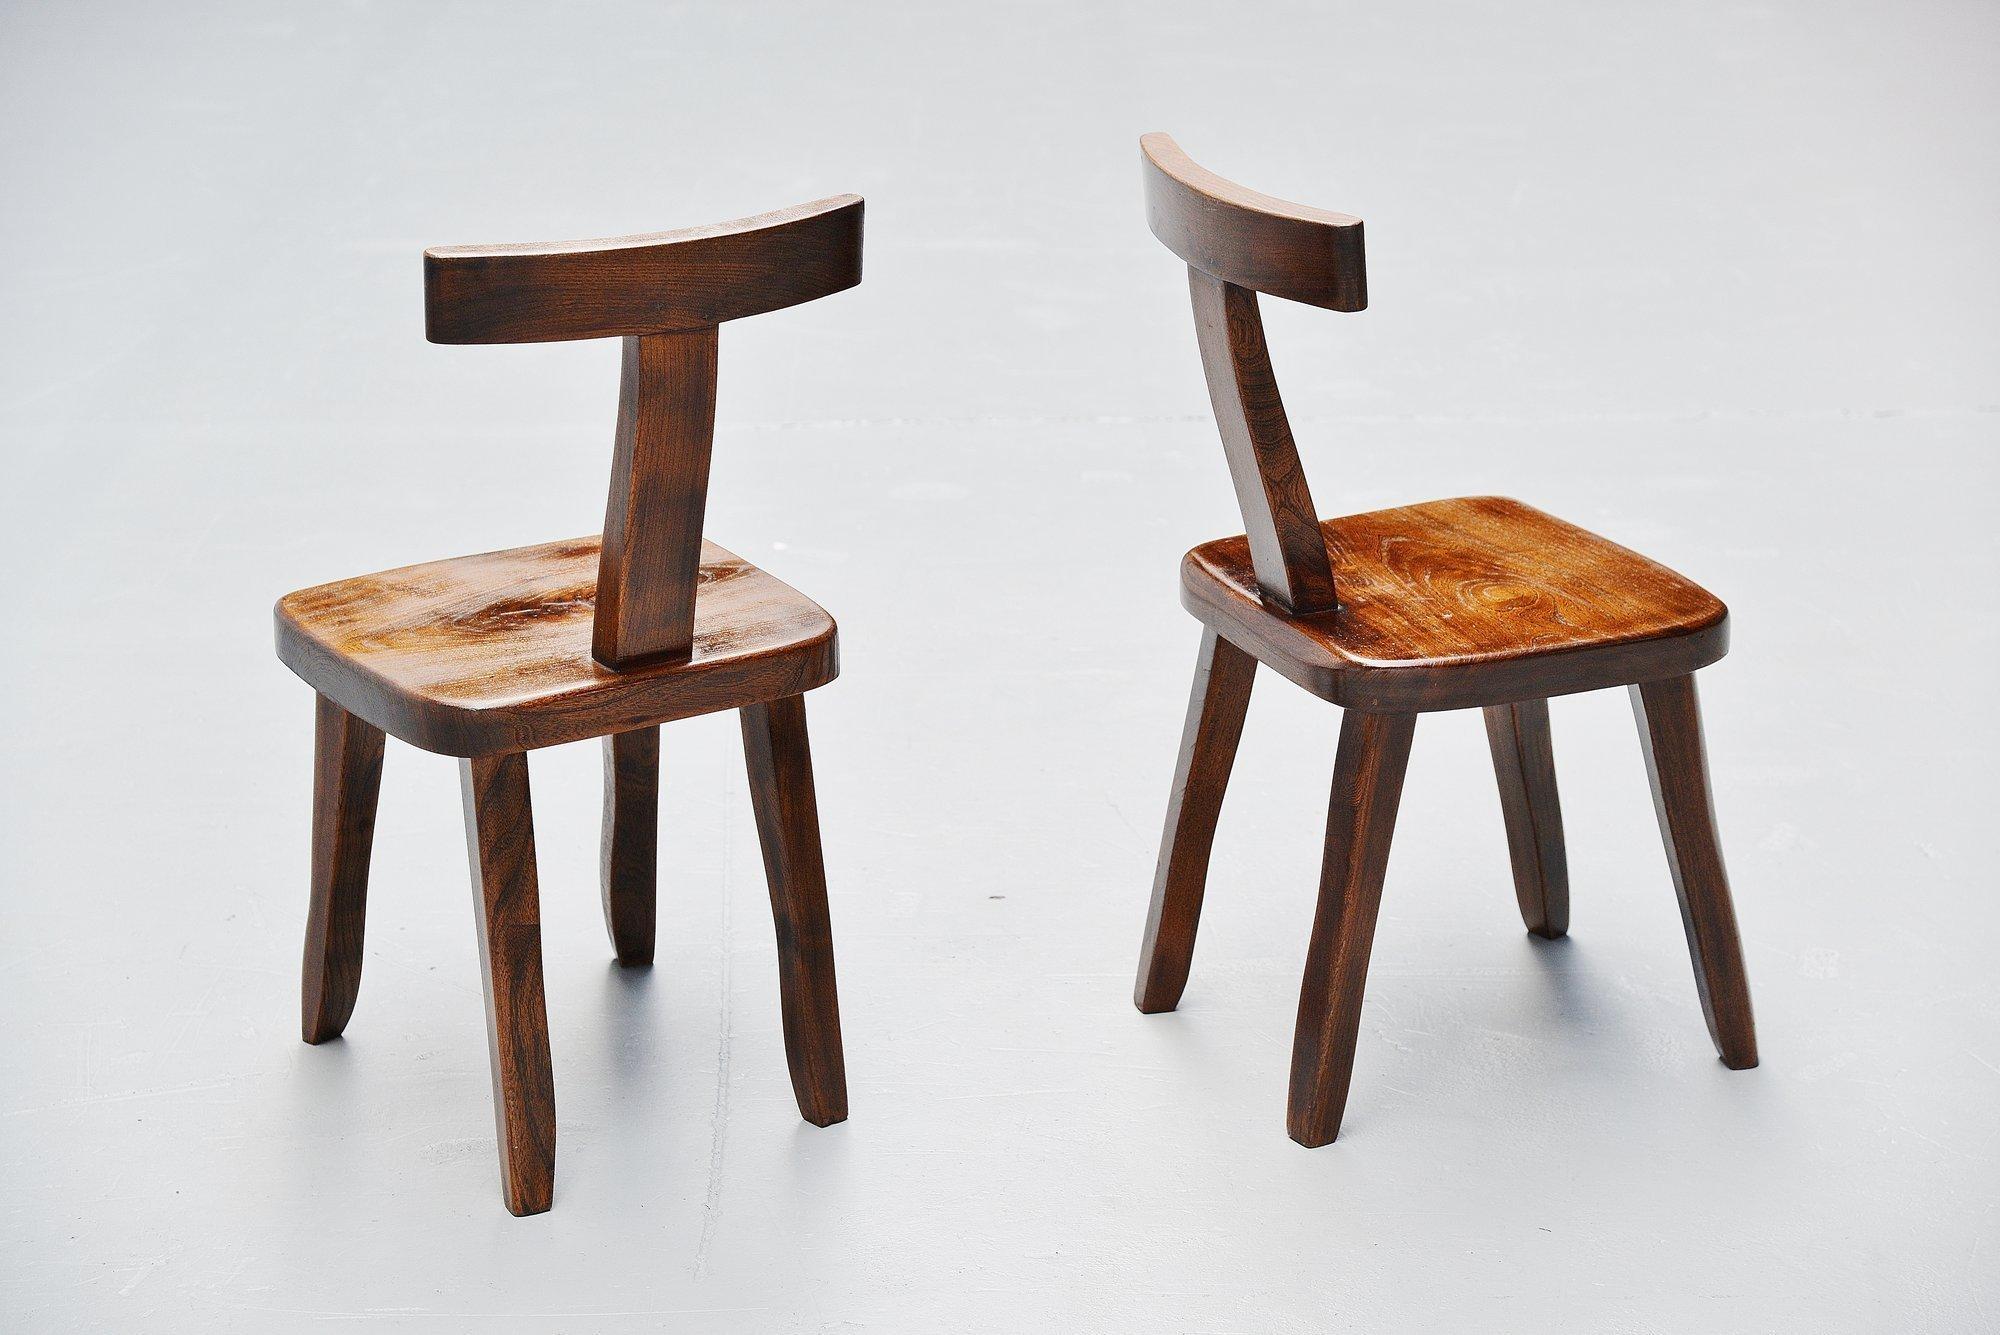 Very nice sculptural side chairs designed by Olavi Hanninen and manufactured by Mikko Nupponen, Finland, 1950. These chairs are made of stained elm wood, sculpturally crafted, handmade chairs with nice brass detailed nails. Very nicely shaped and in